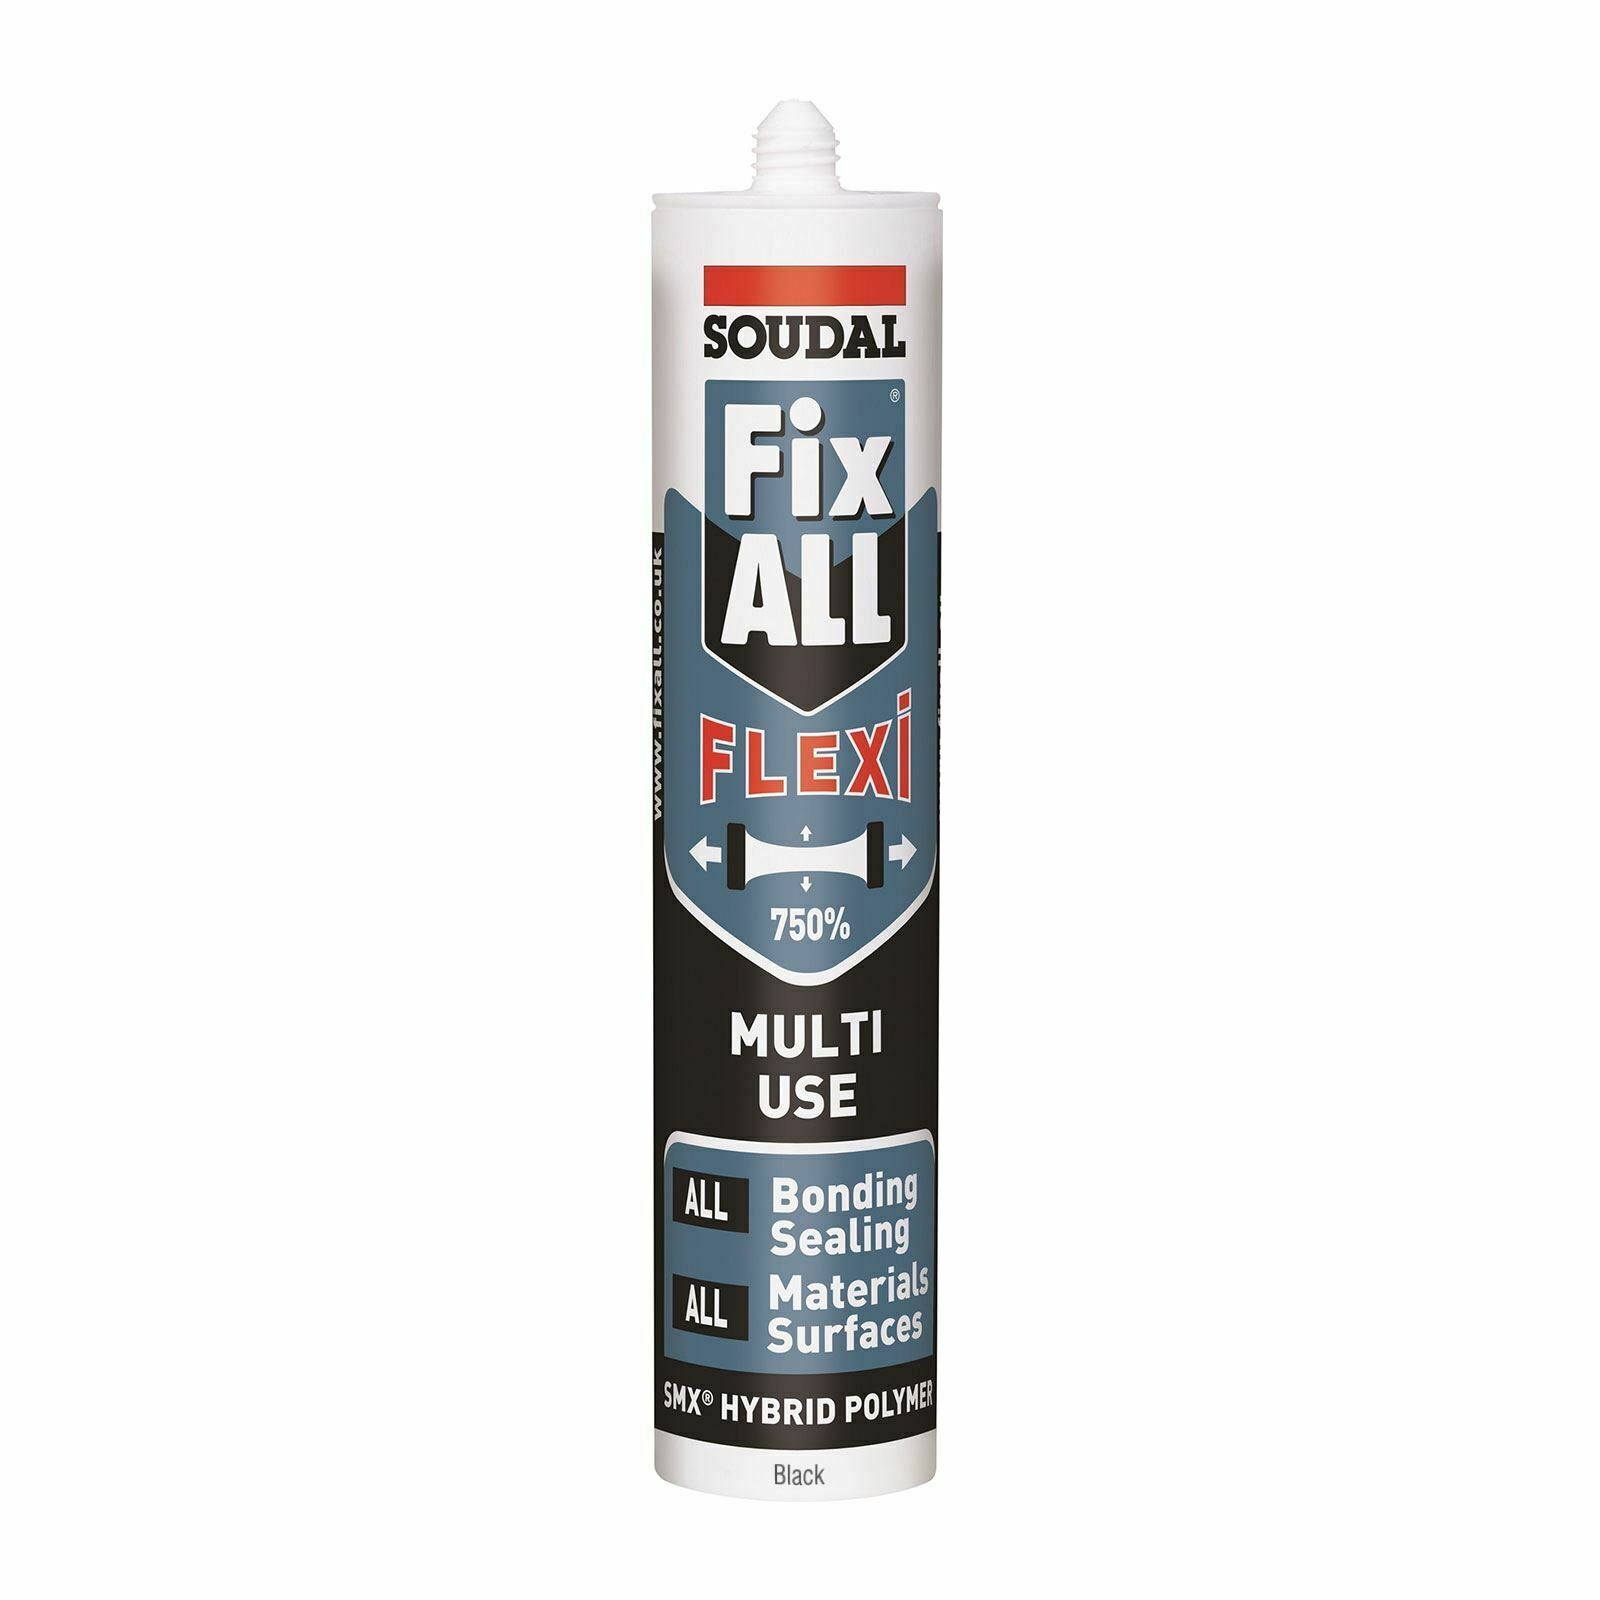 Soudal White Fix All Flexi Strong Polymer Sealant & Adhesive